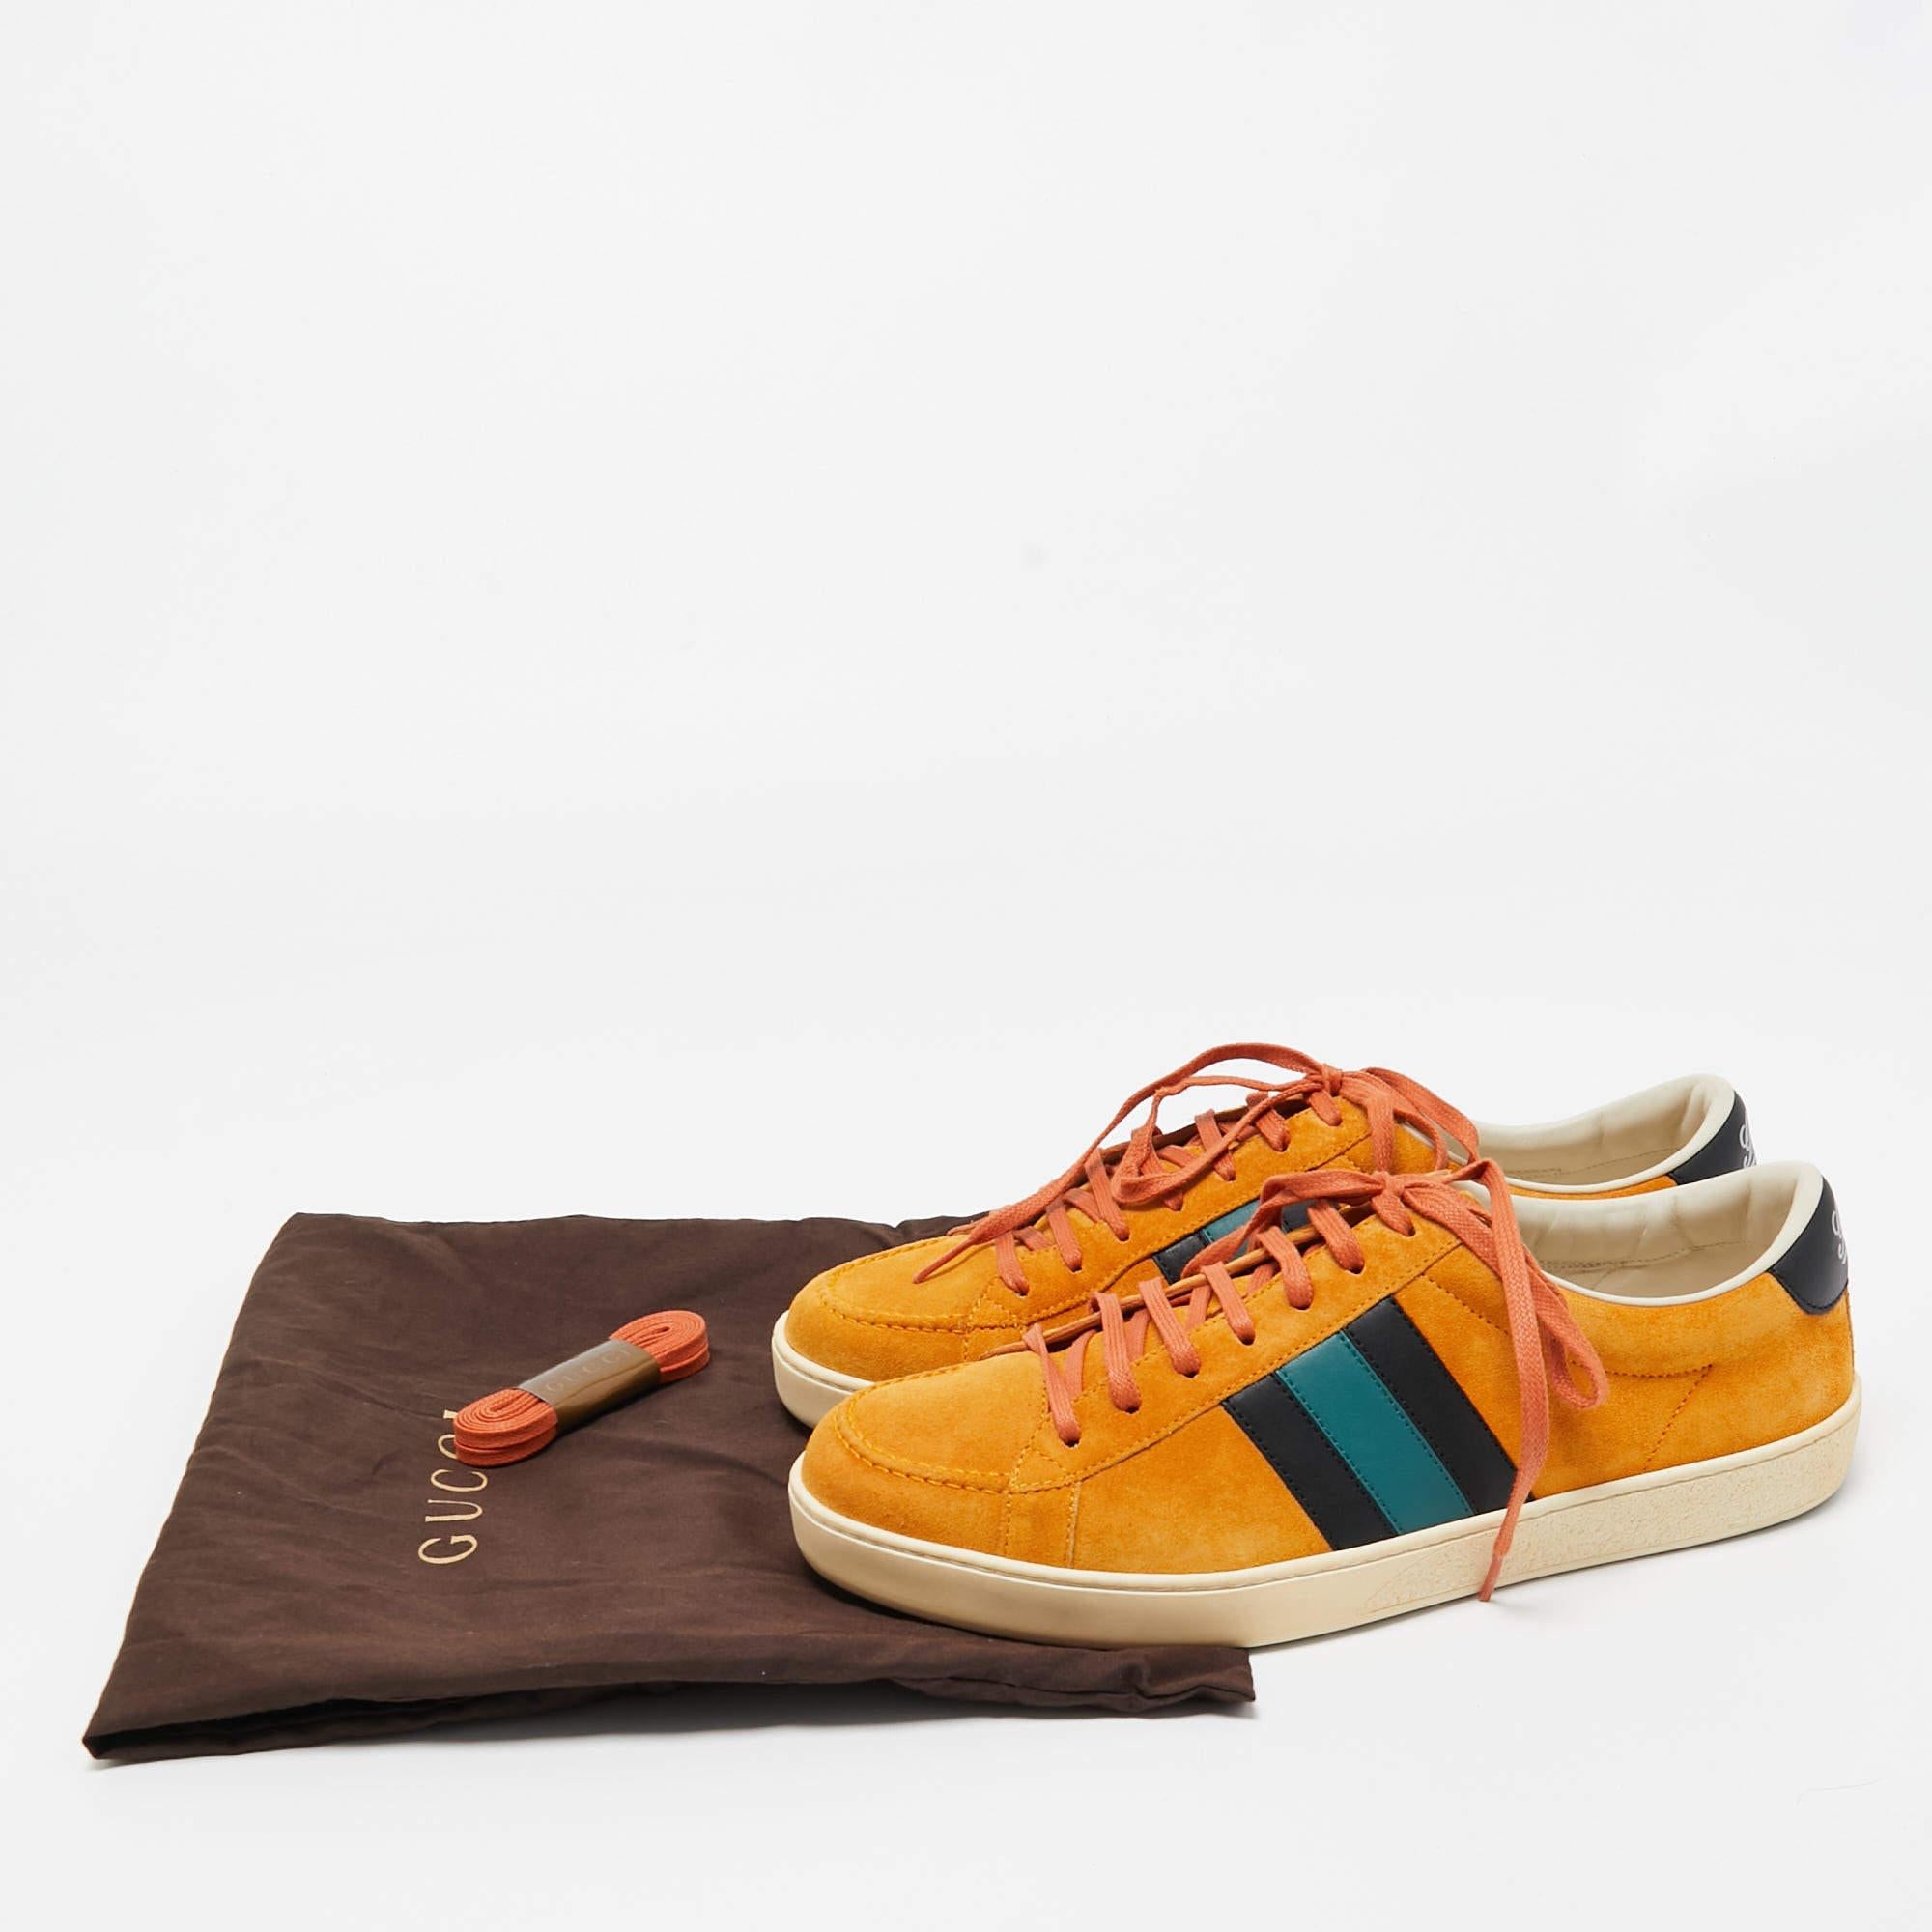 Gucci Mustard Suede Web Low Top Sneakers Size 42.5 3